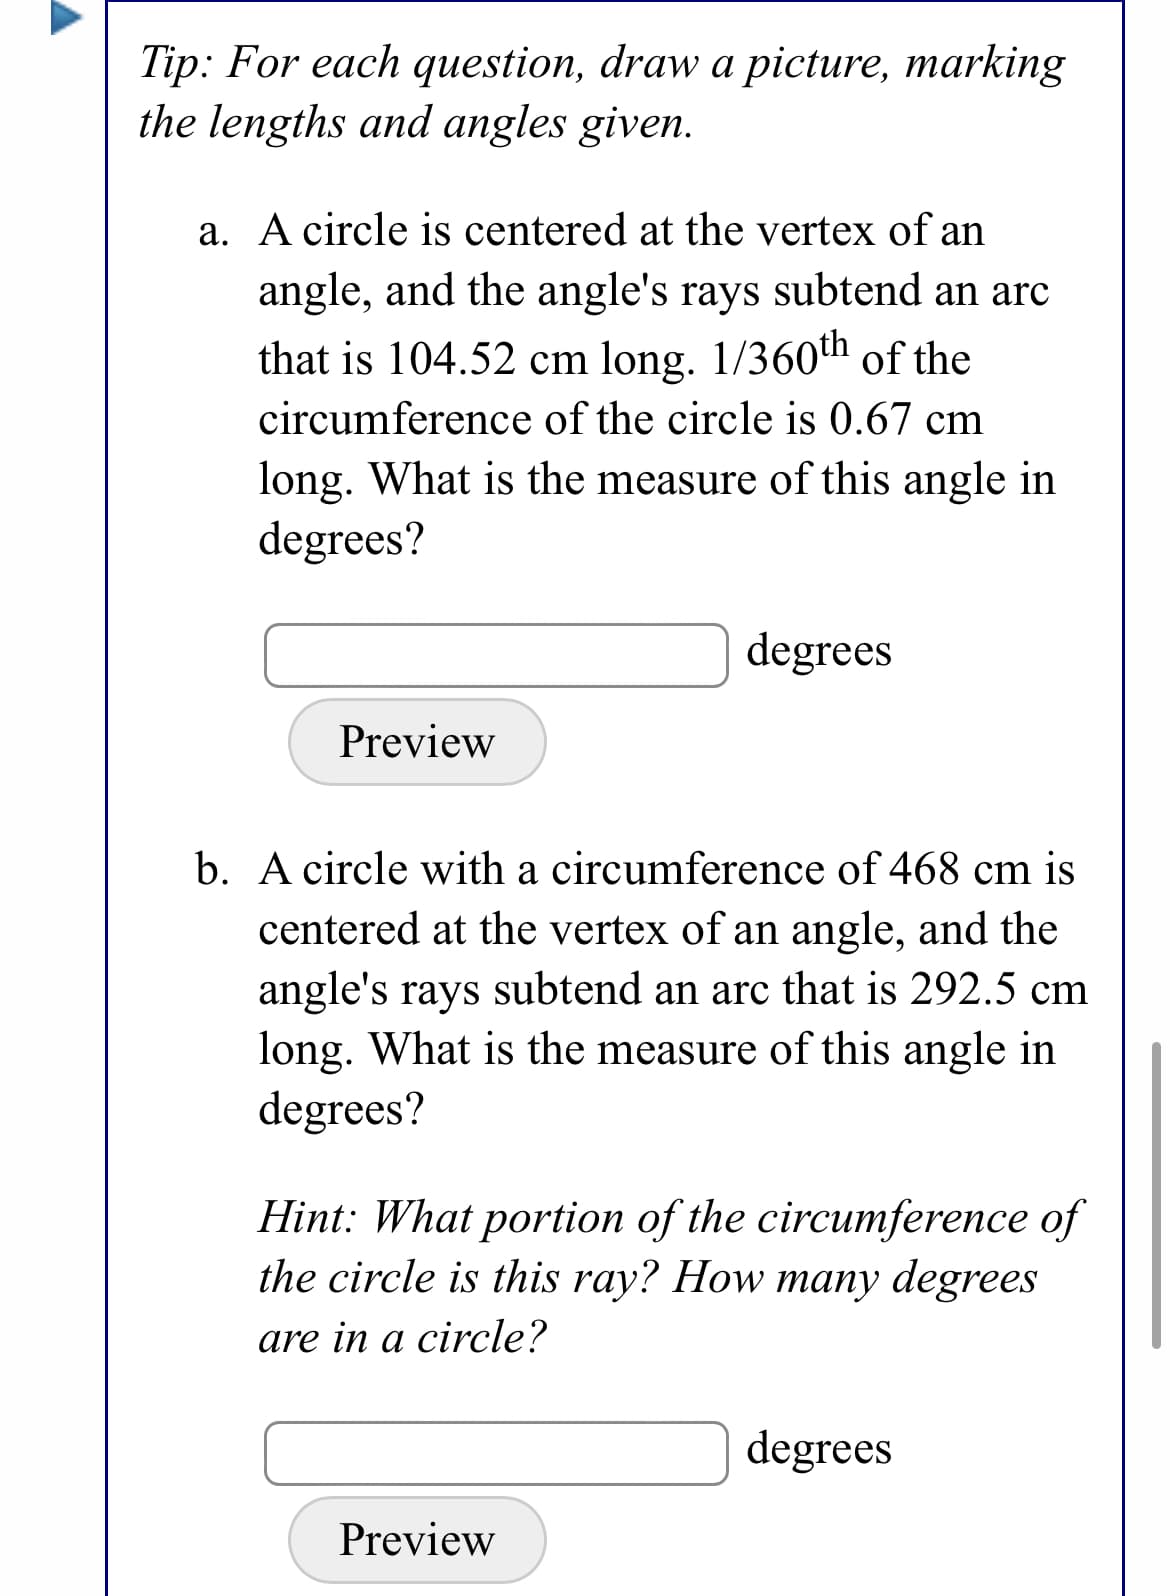 Tip: For each question, draw a picture, marking
the lengths and angles given.
a. A circle is centered at the vertex of an
angle, and the angle's rays subtend an arc
that is 104.52 cm long. 1/360th of the
circumference of the circle is 0.67 cm
long. What is the measure of this angle in
degrees?
degrees
Preview
b. A circle with a circumference of 468 cm is
centered at the vertex of an angle, and the
angle's rays subtend an arc that is 292.5 cm
long. What is the measure of this angle in
degrees?
Hint: What portion of the circumference of
the circle is this ray? How many degrees
are in a circle?
degrees
Preview
